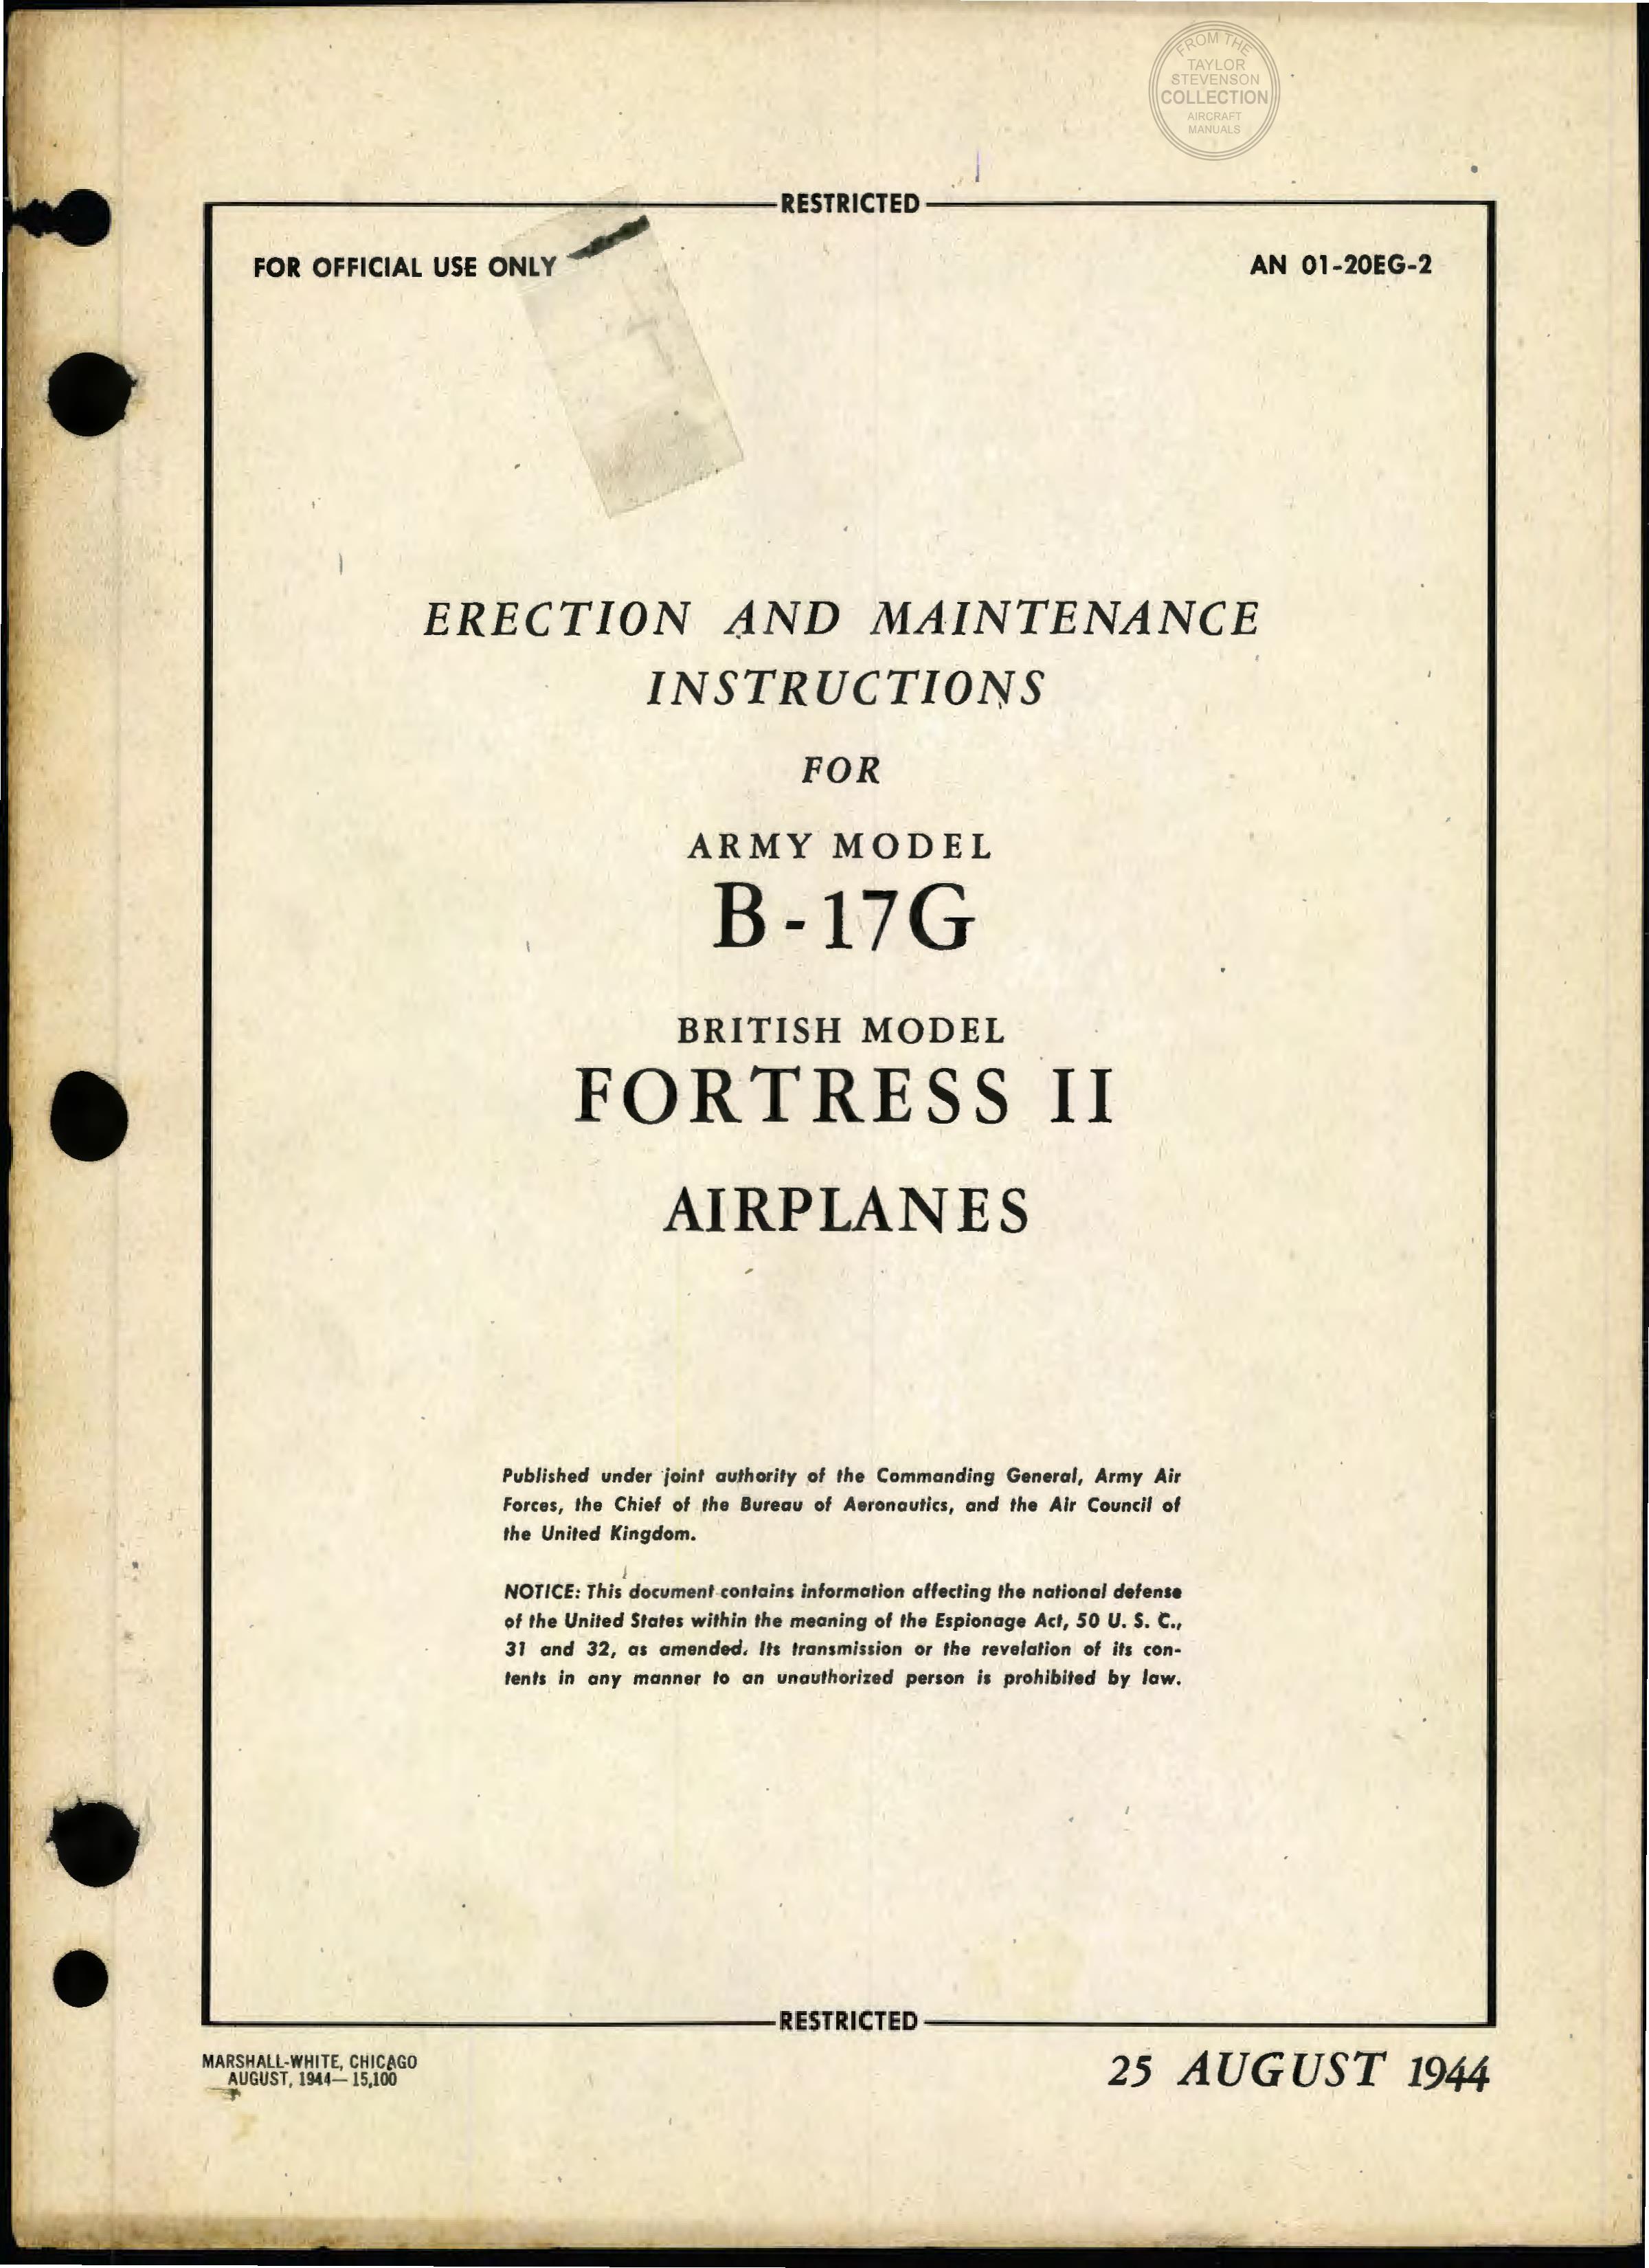 Sample page 1 from AirCorps Library document: Erection & Maintenance - B-17G - Aug 1944